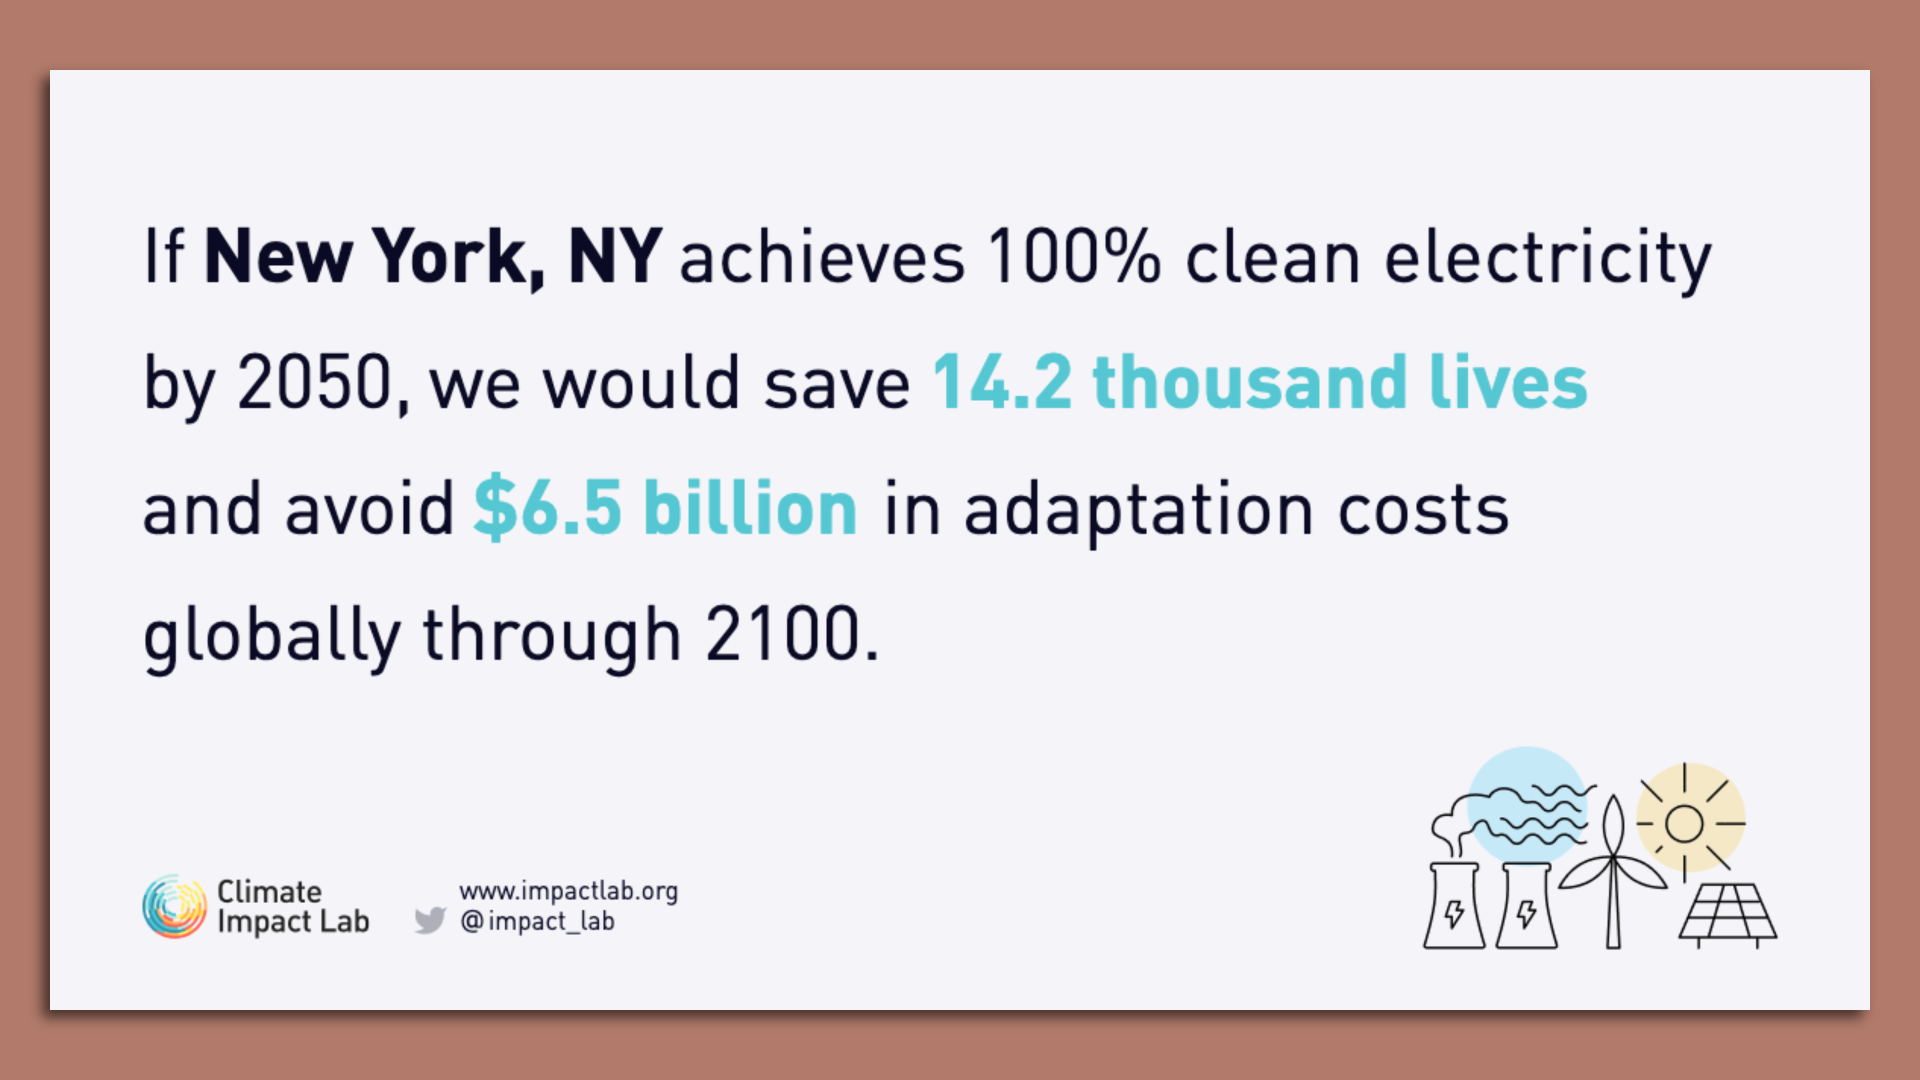 Image showing calculations of lives saved if NYC climate targets are achieved.